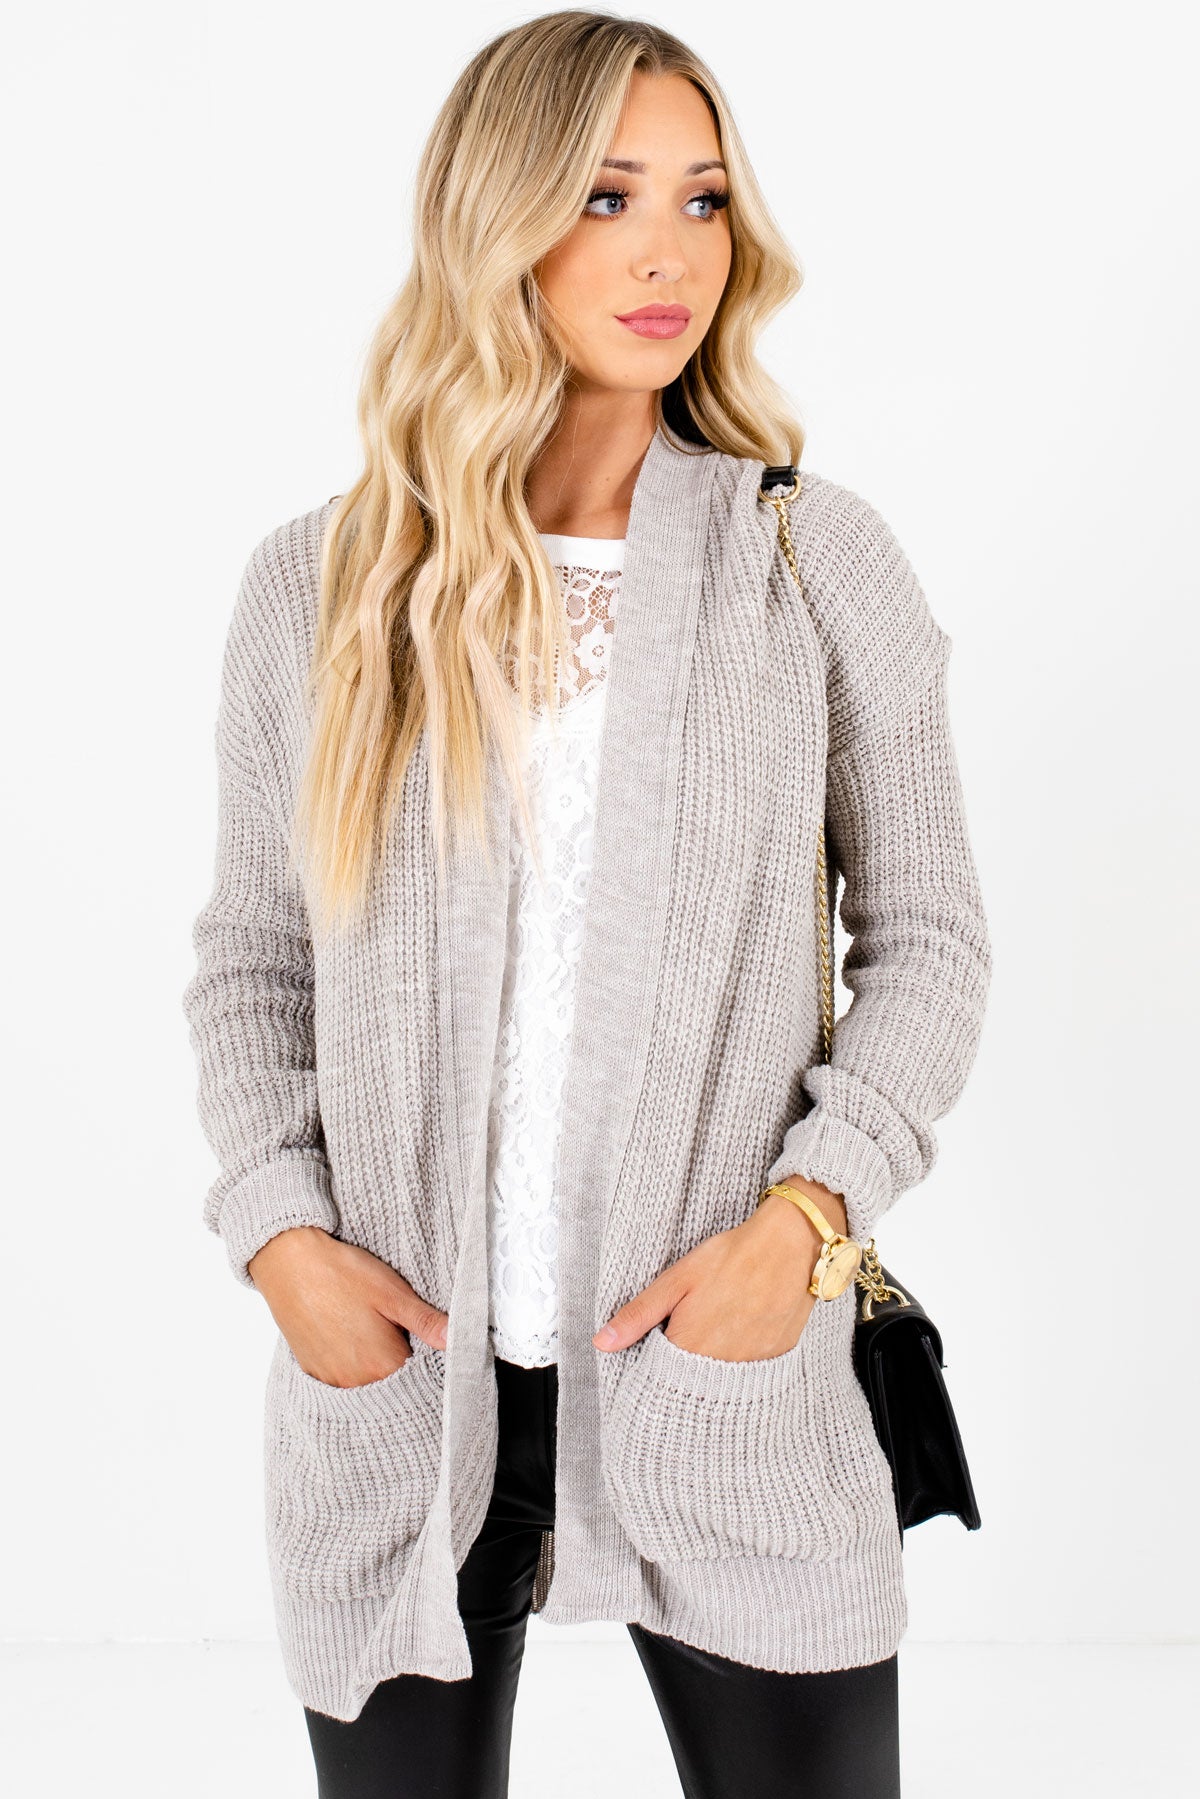 Women’s Heather Gray Business Casual Boutique Cardigan